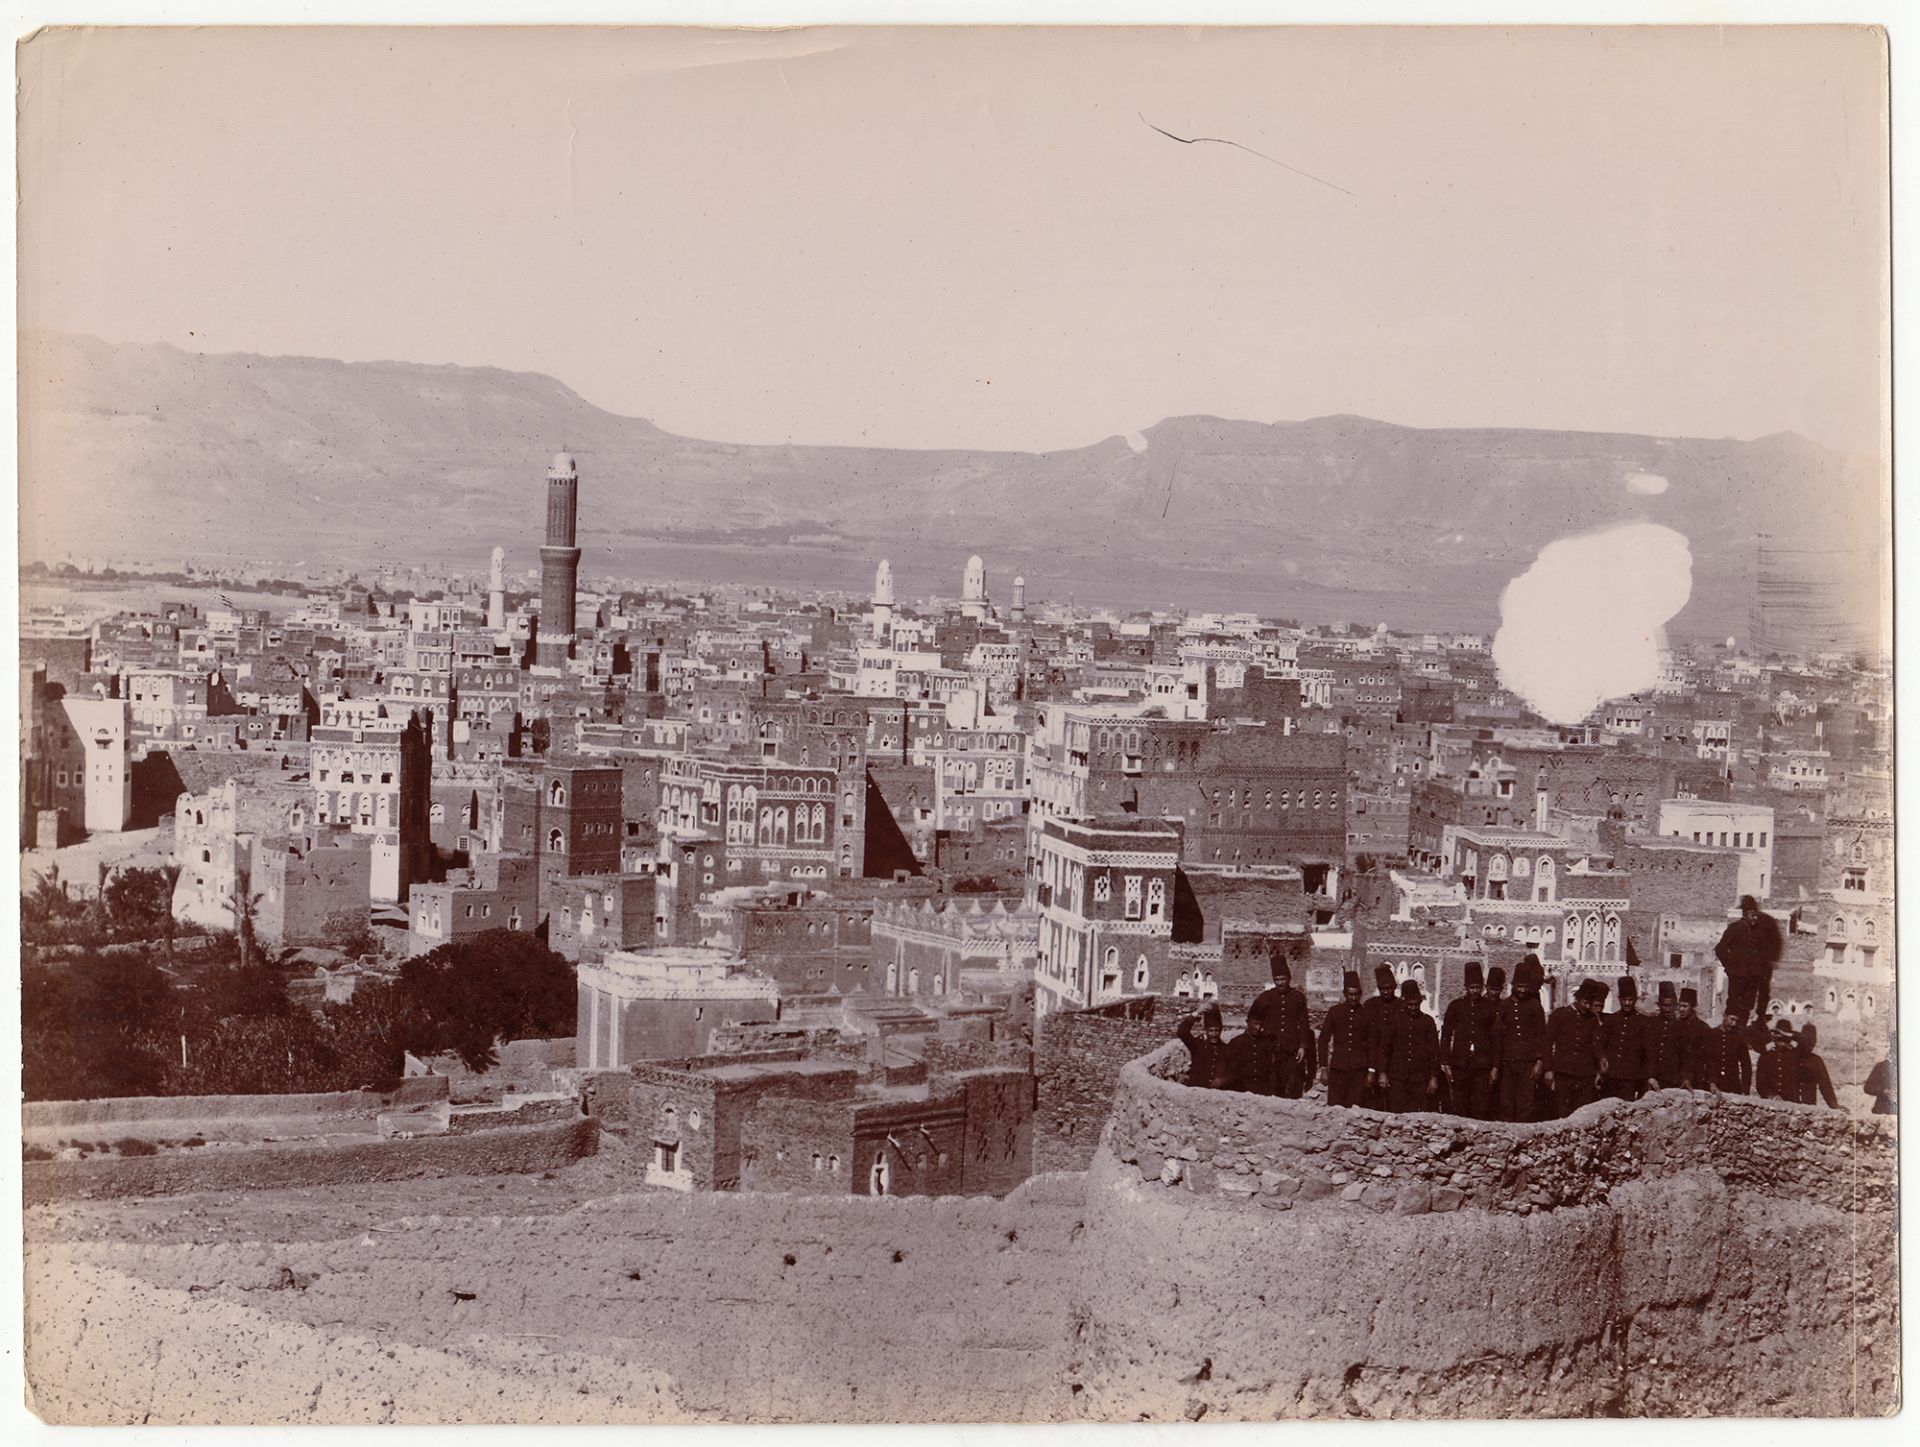 A RARE ARCHIVE ABOUT YEMEN, BELONGED TO AHMED IZZET PASHA - Image 58 of 77